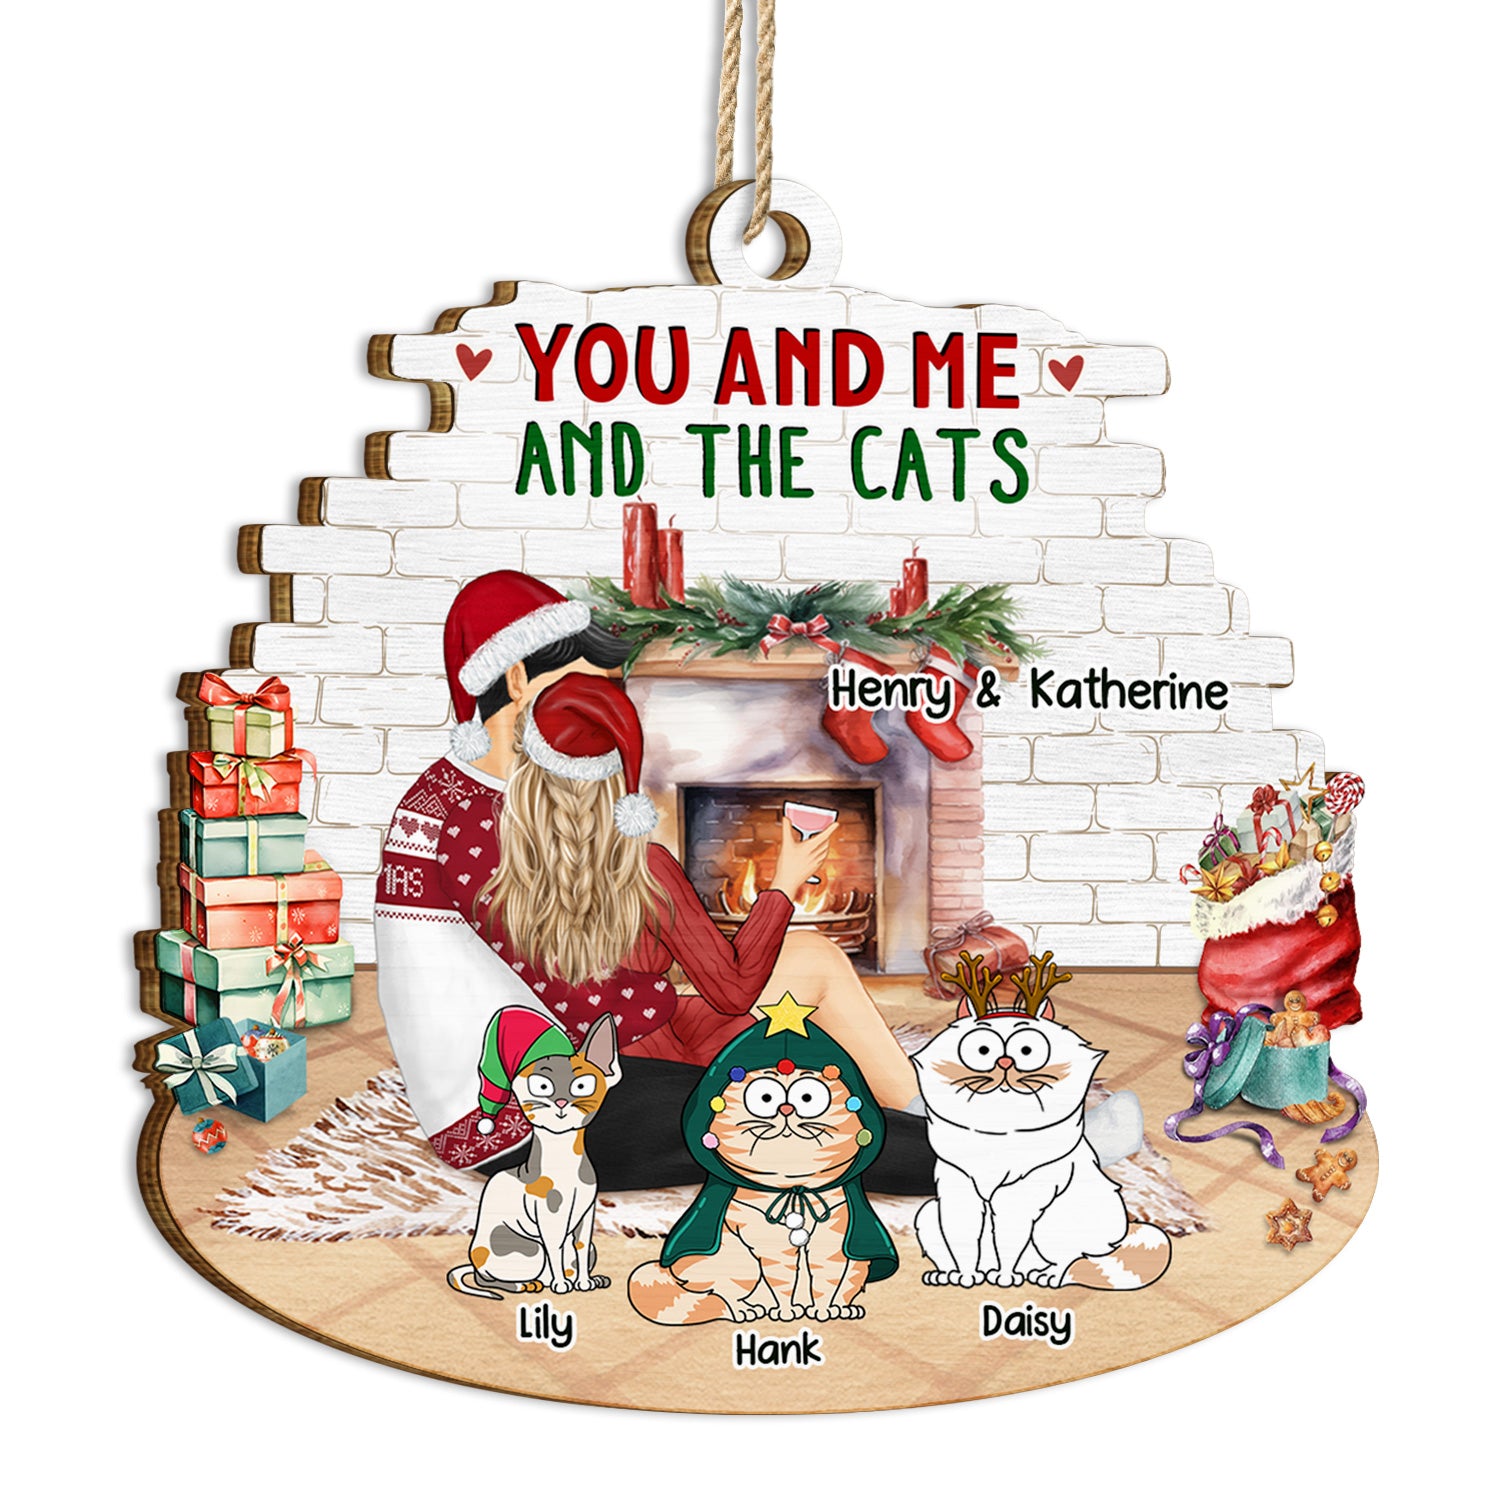 You And Me And The Cats - Christmas Gift For Cat Lovers - Personalized Custom Shaped Wooden Ornament